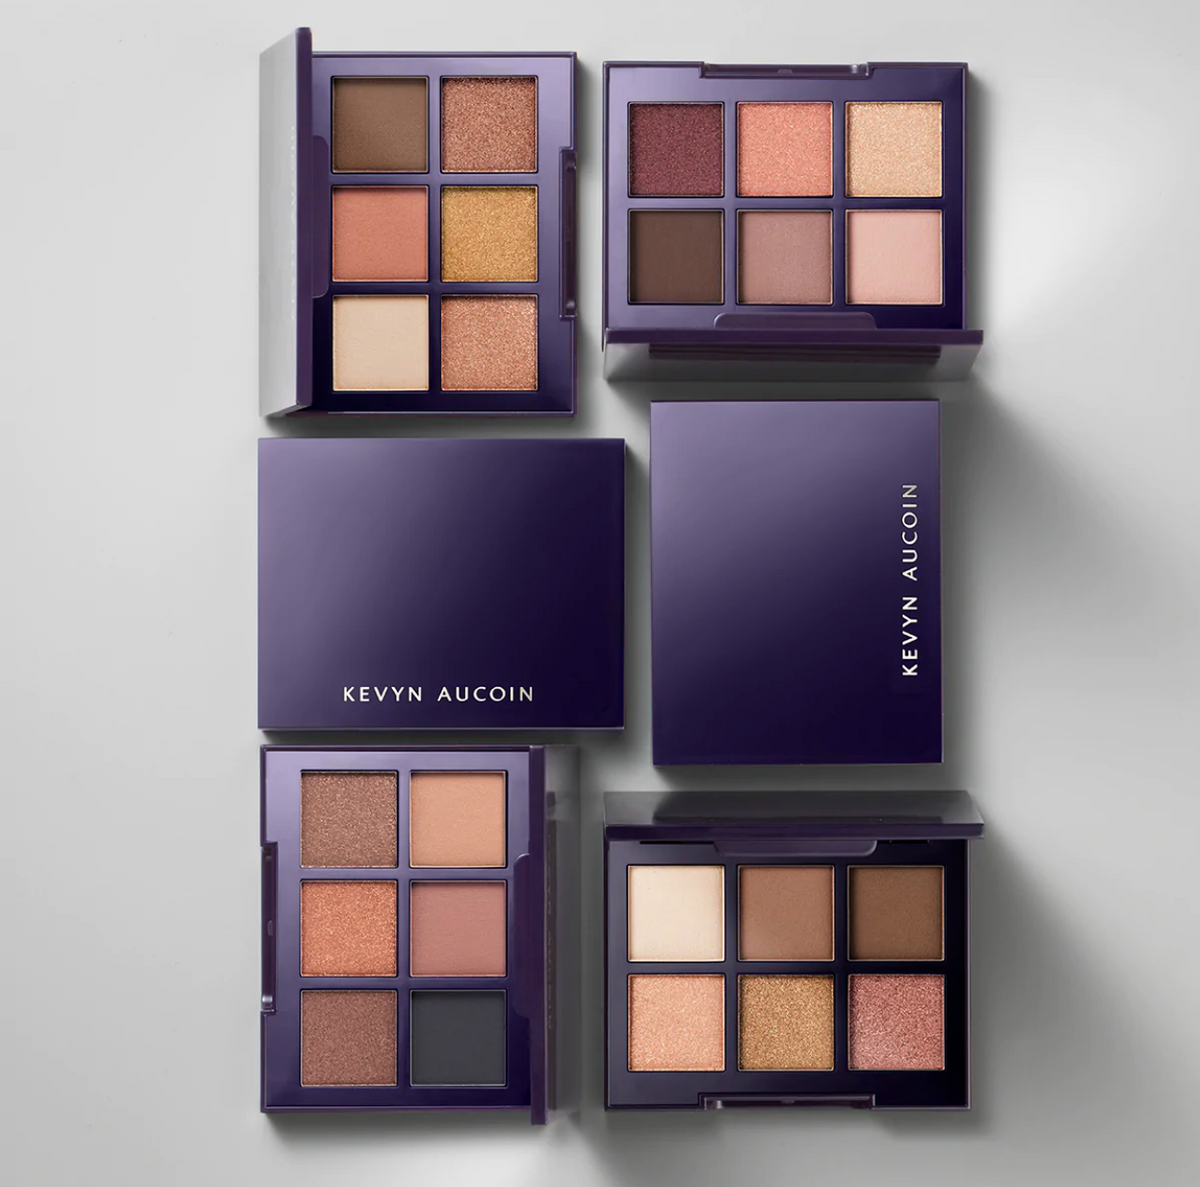 The Contour Eyeshadow Palette Collection